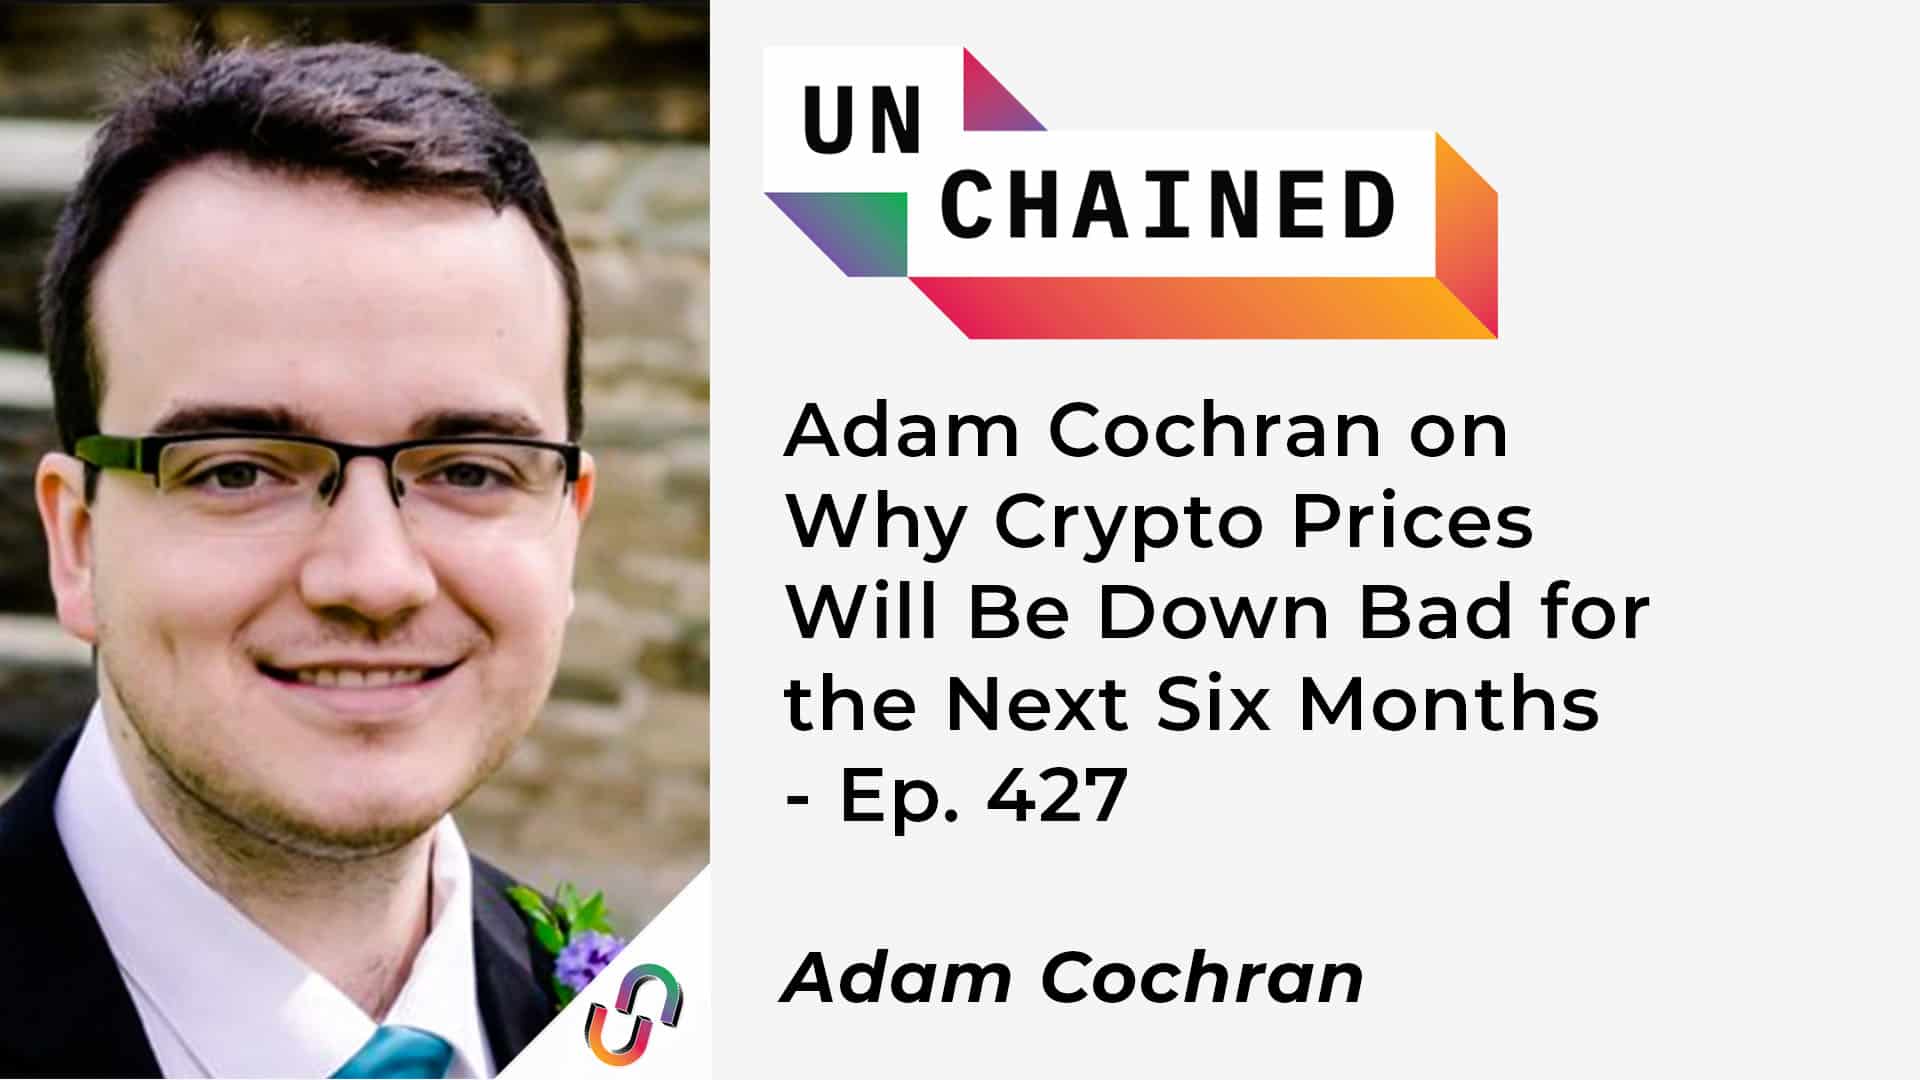 Adam Cochran on Why Crypto Prices Will Be Down Bad for the Next Six Months - Ep. 427